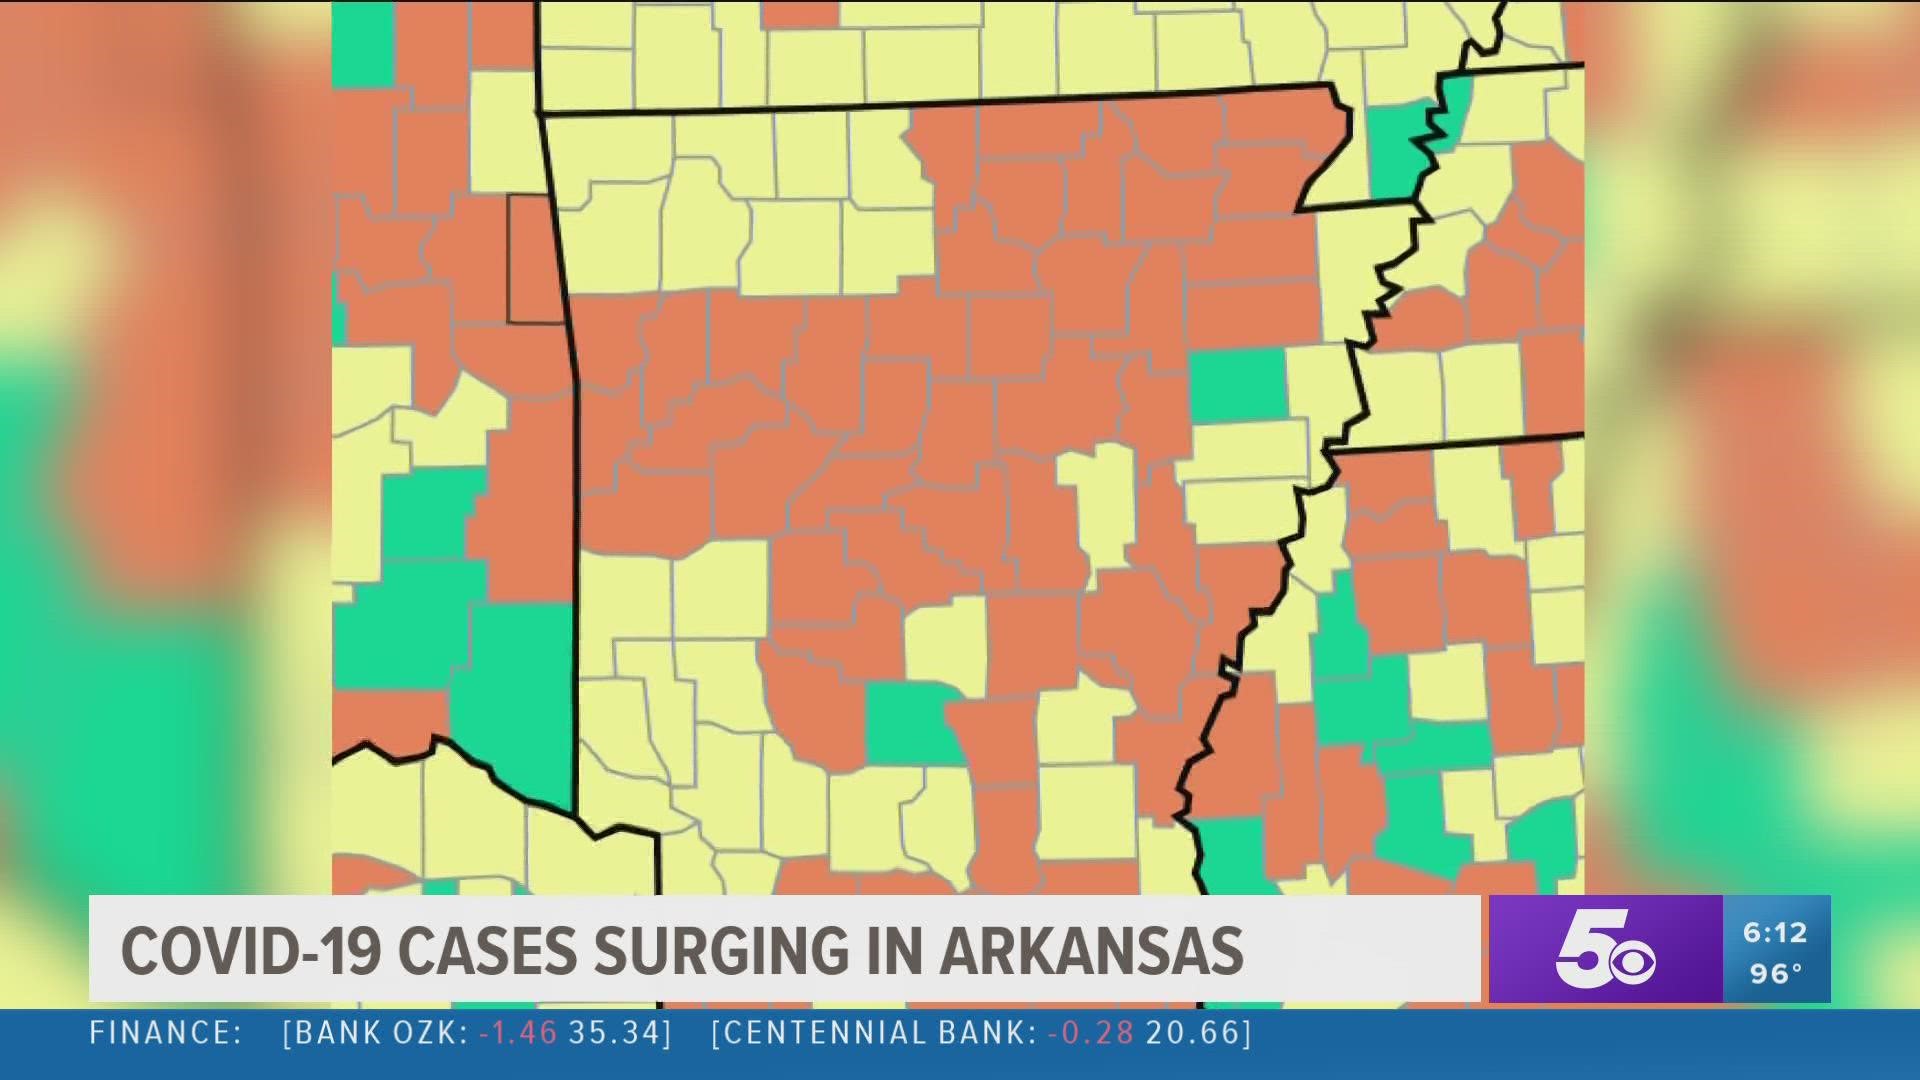 COVID-19 surges in Arkansas have caused different counties across the state to change the risk level and take percautions.